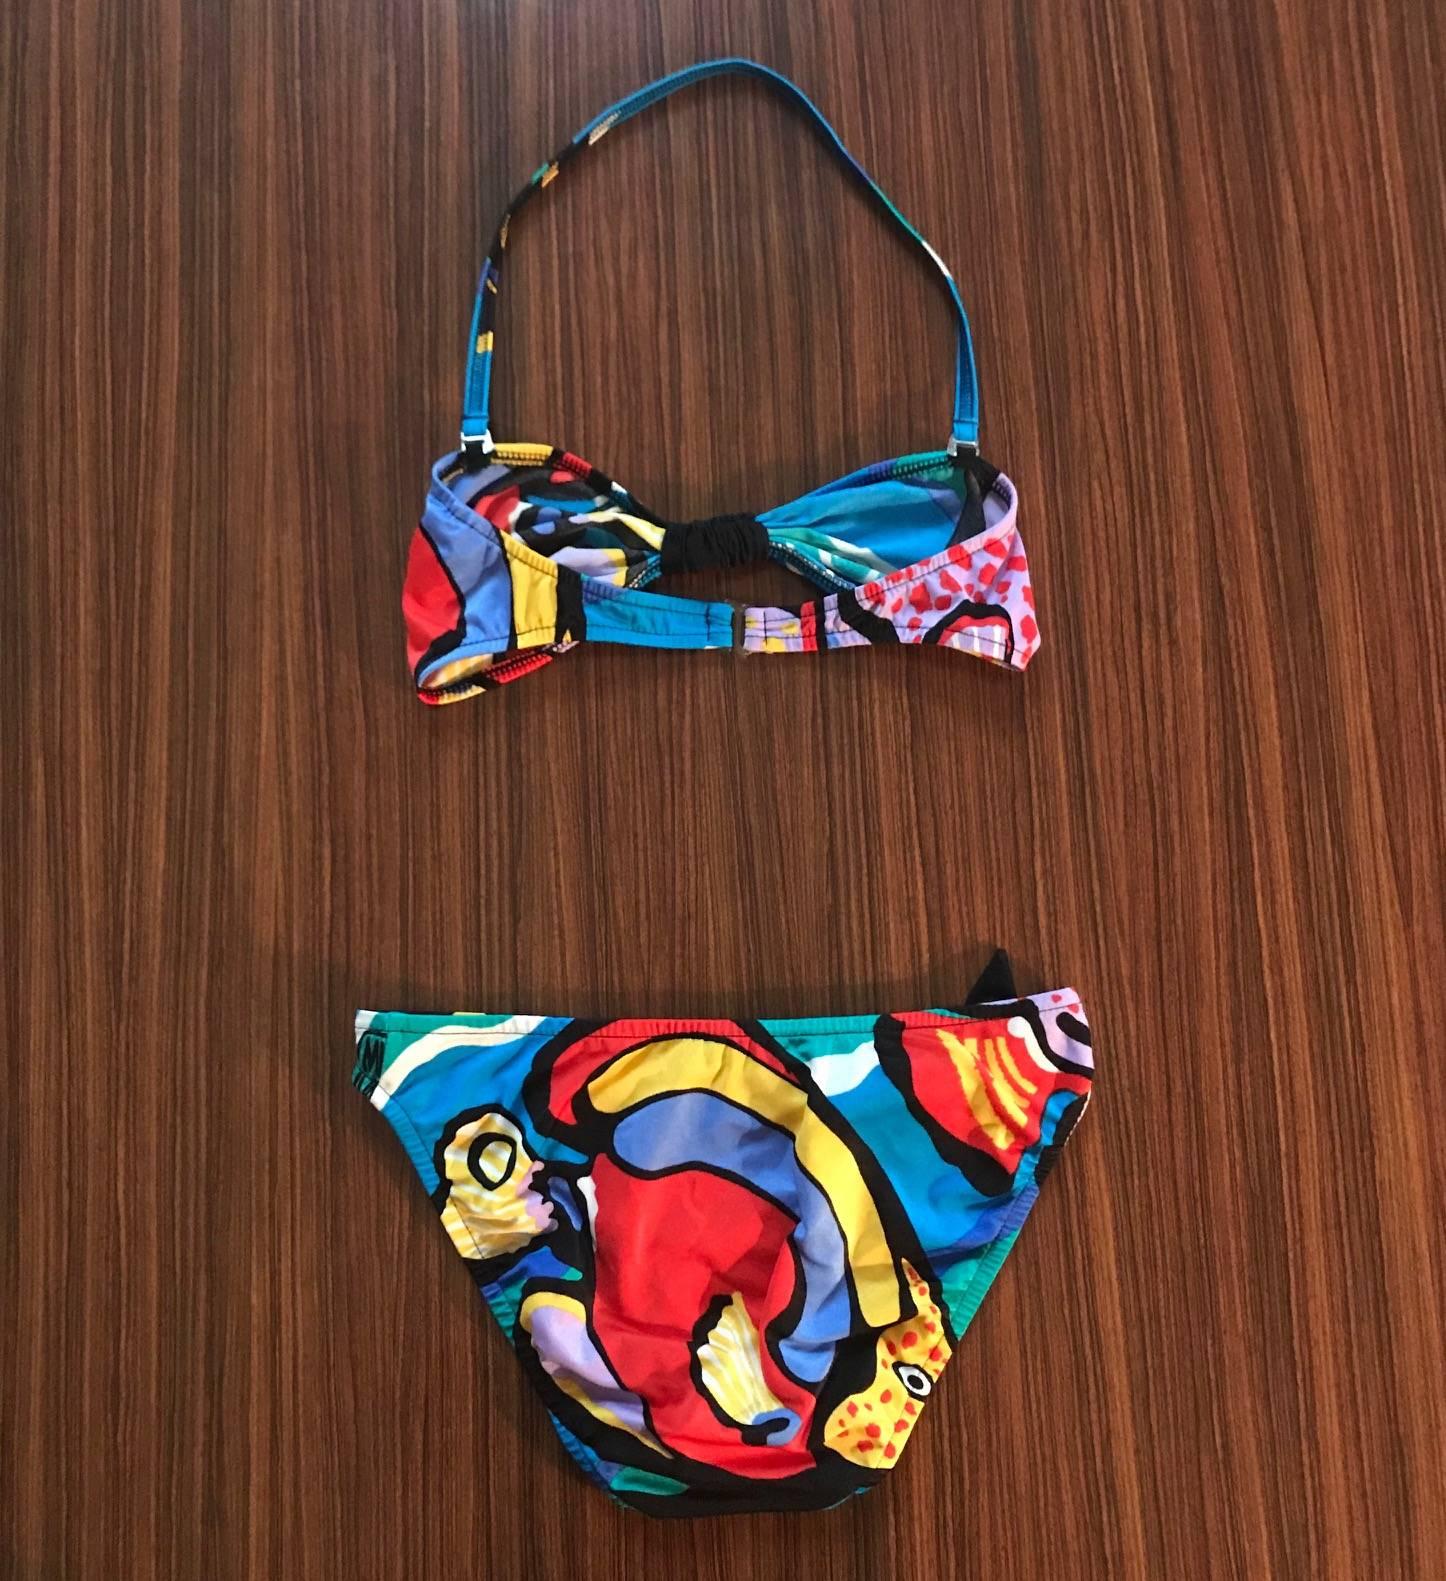 Michaele Vollbracht for Sofere 1980s bikini bathing suit in a colorful abstract pattern. Unlined bandeau top with removable halter strap, bikini bottom. Half-bow adornments at chest and hip.

85% nylon, 15% lycra.

Made in USA.

Labelled size 10,